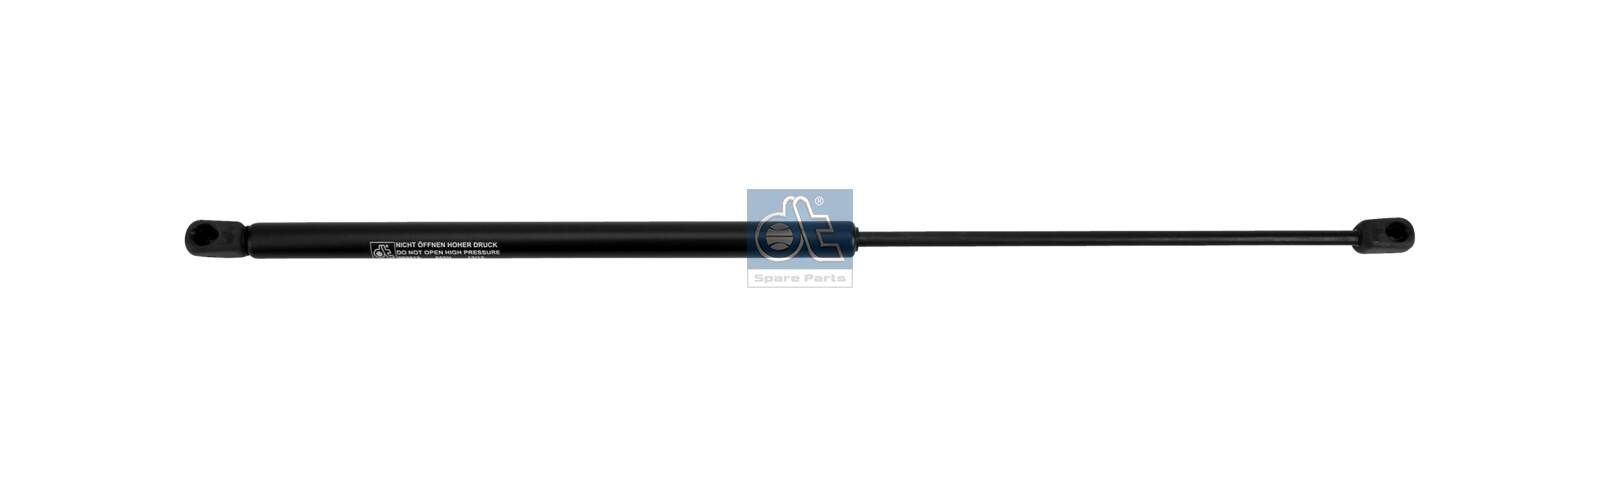 Tailgate gas struts DT Spare Parts 700N, 585 mm - 4.63446